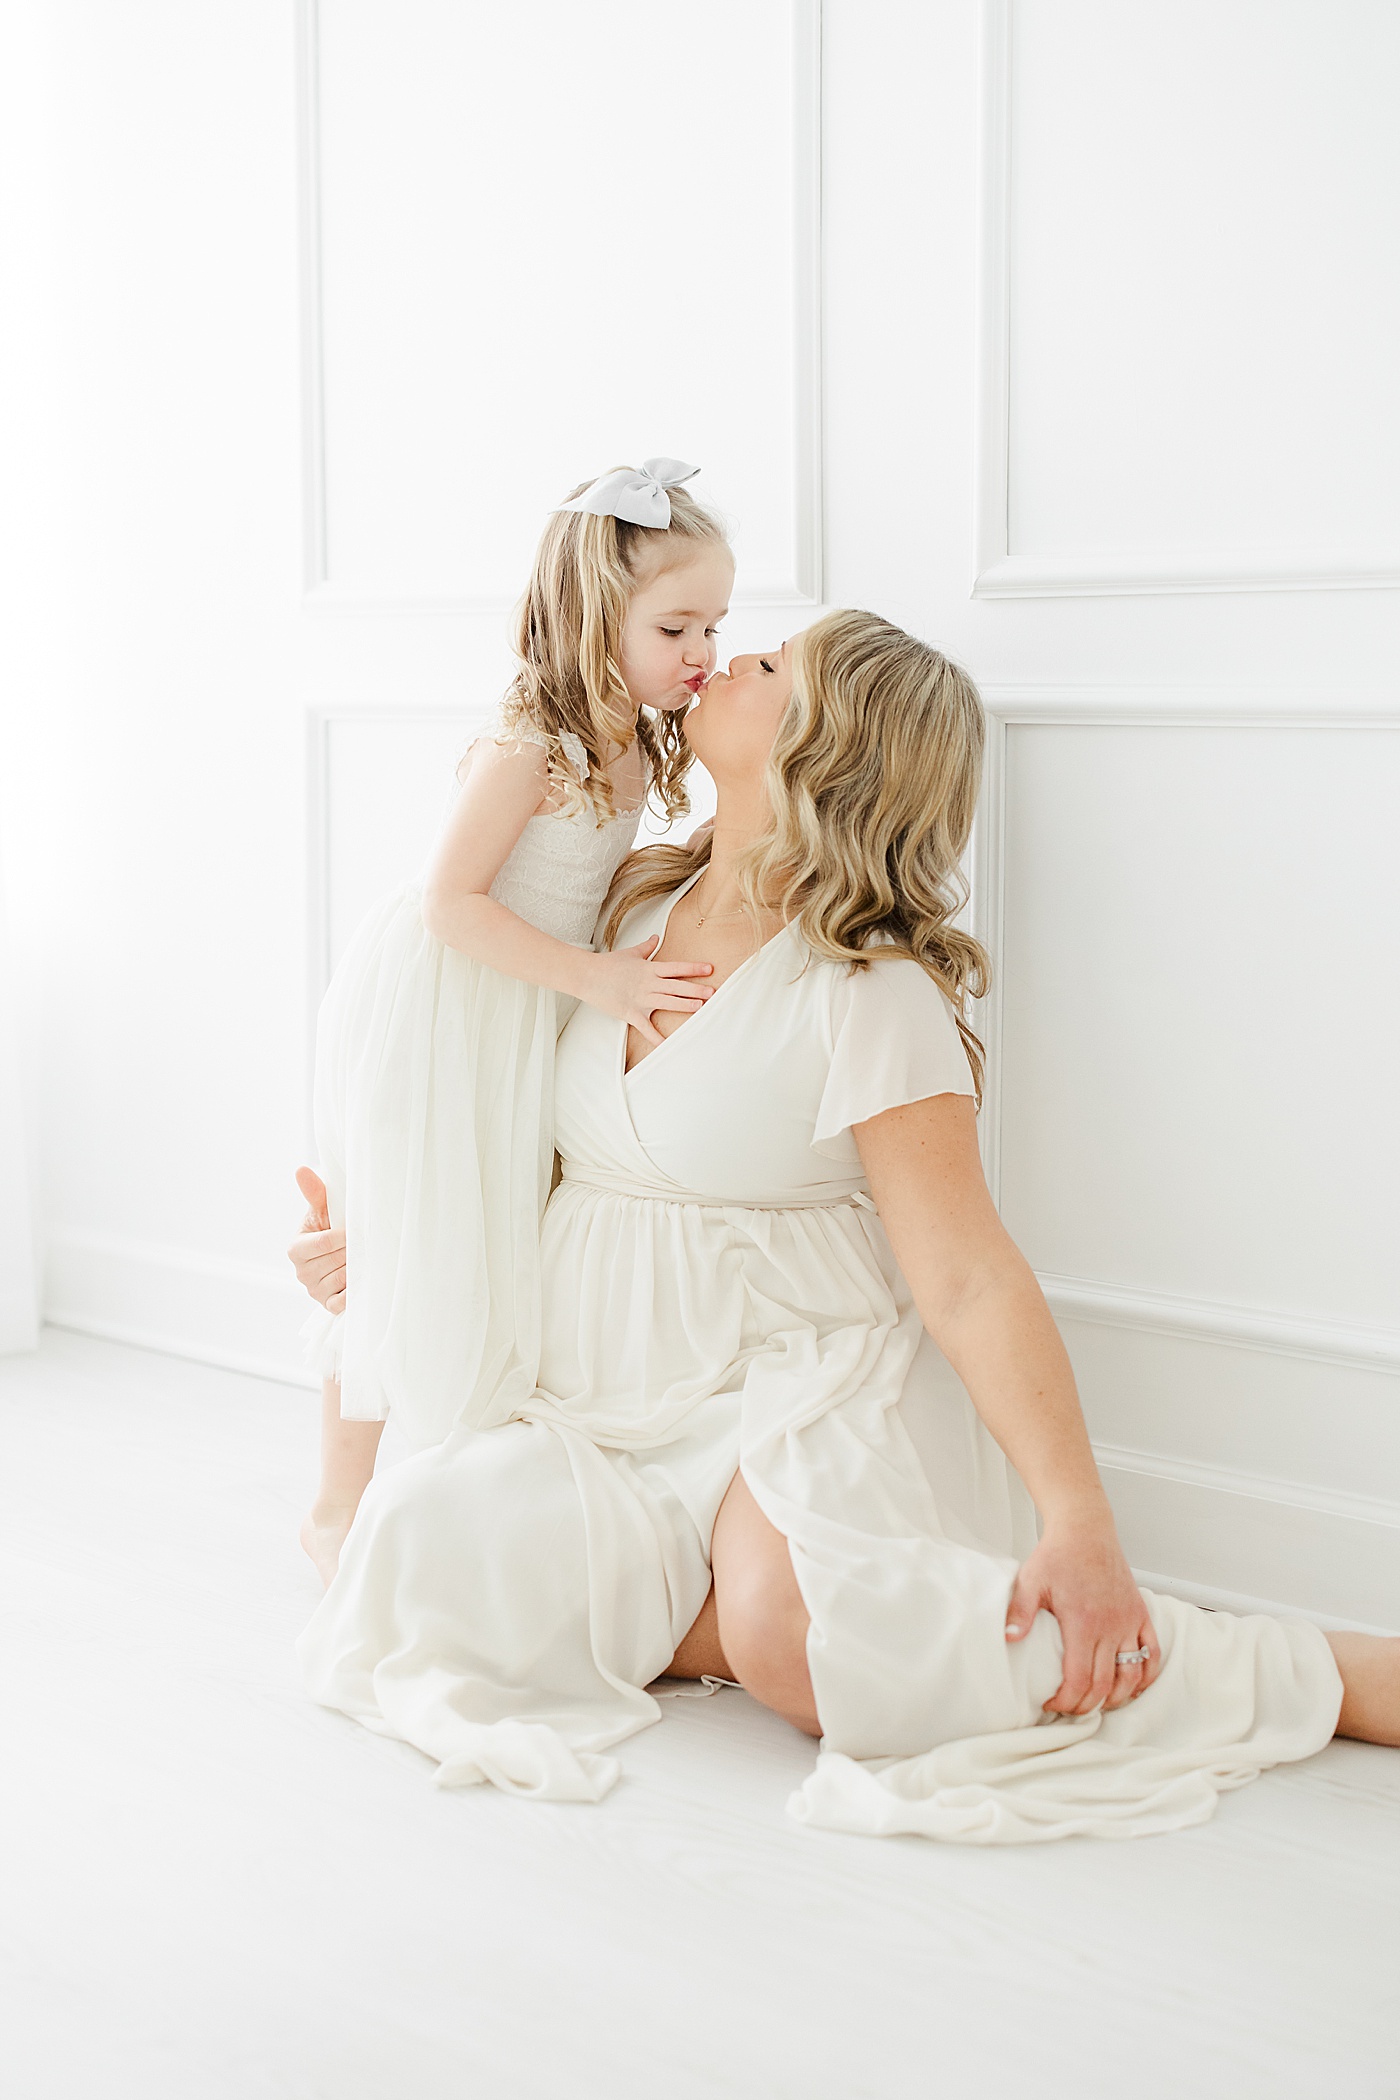 Mother-daughter studio maternity session with Kristin Wood Photography in Westport, CT.